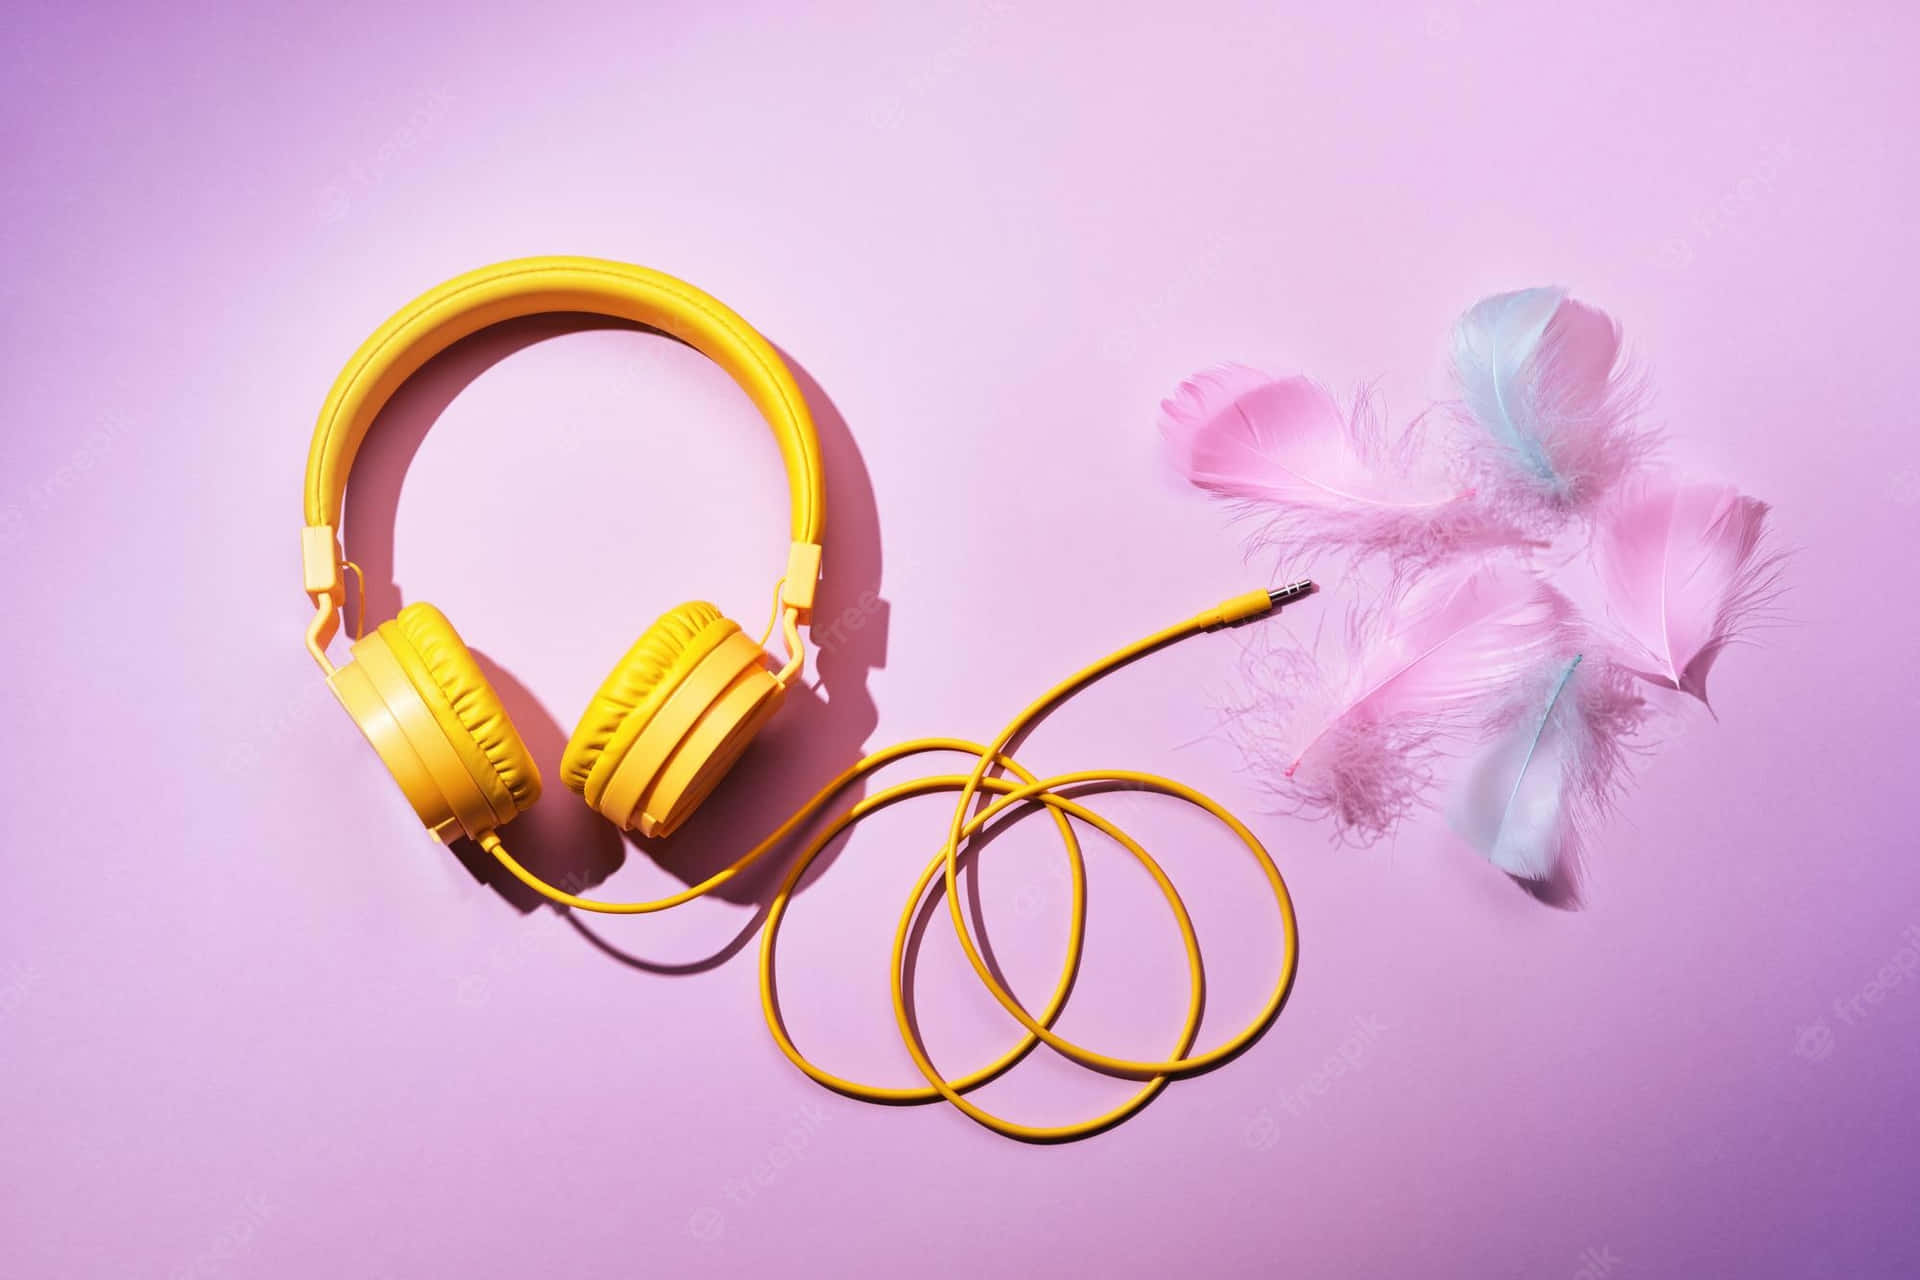 Yellow Headphones With Feathers On A Pink Background Wallpaper